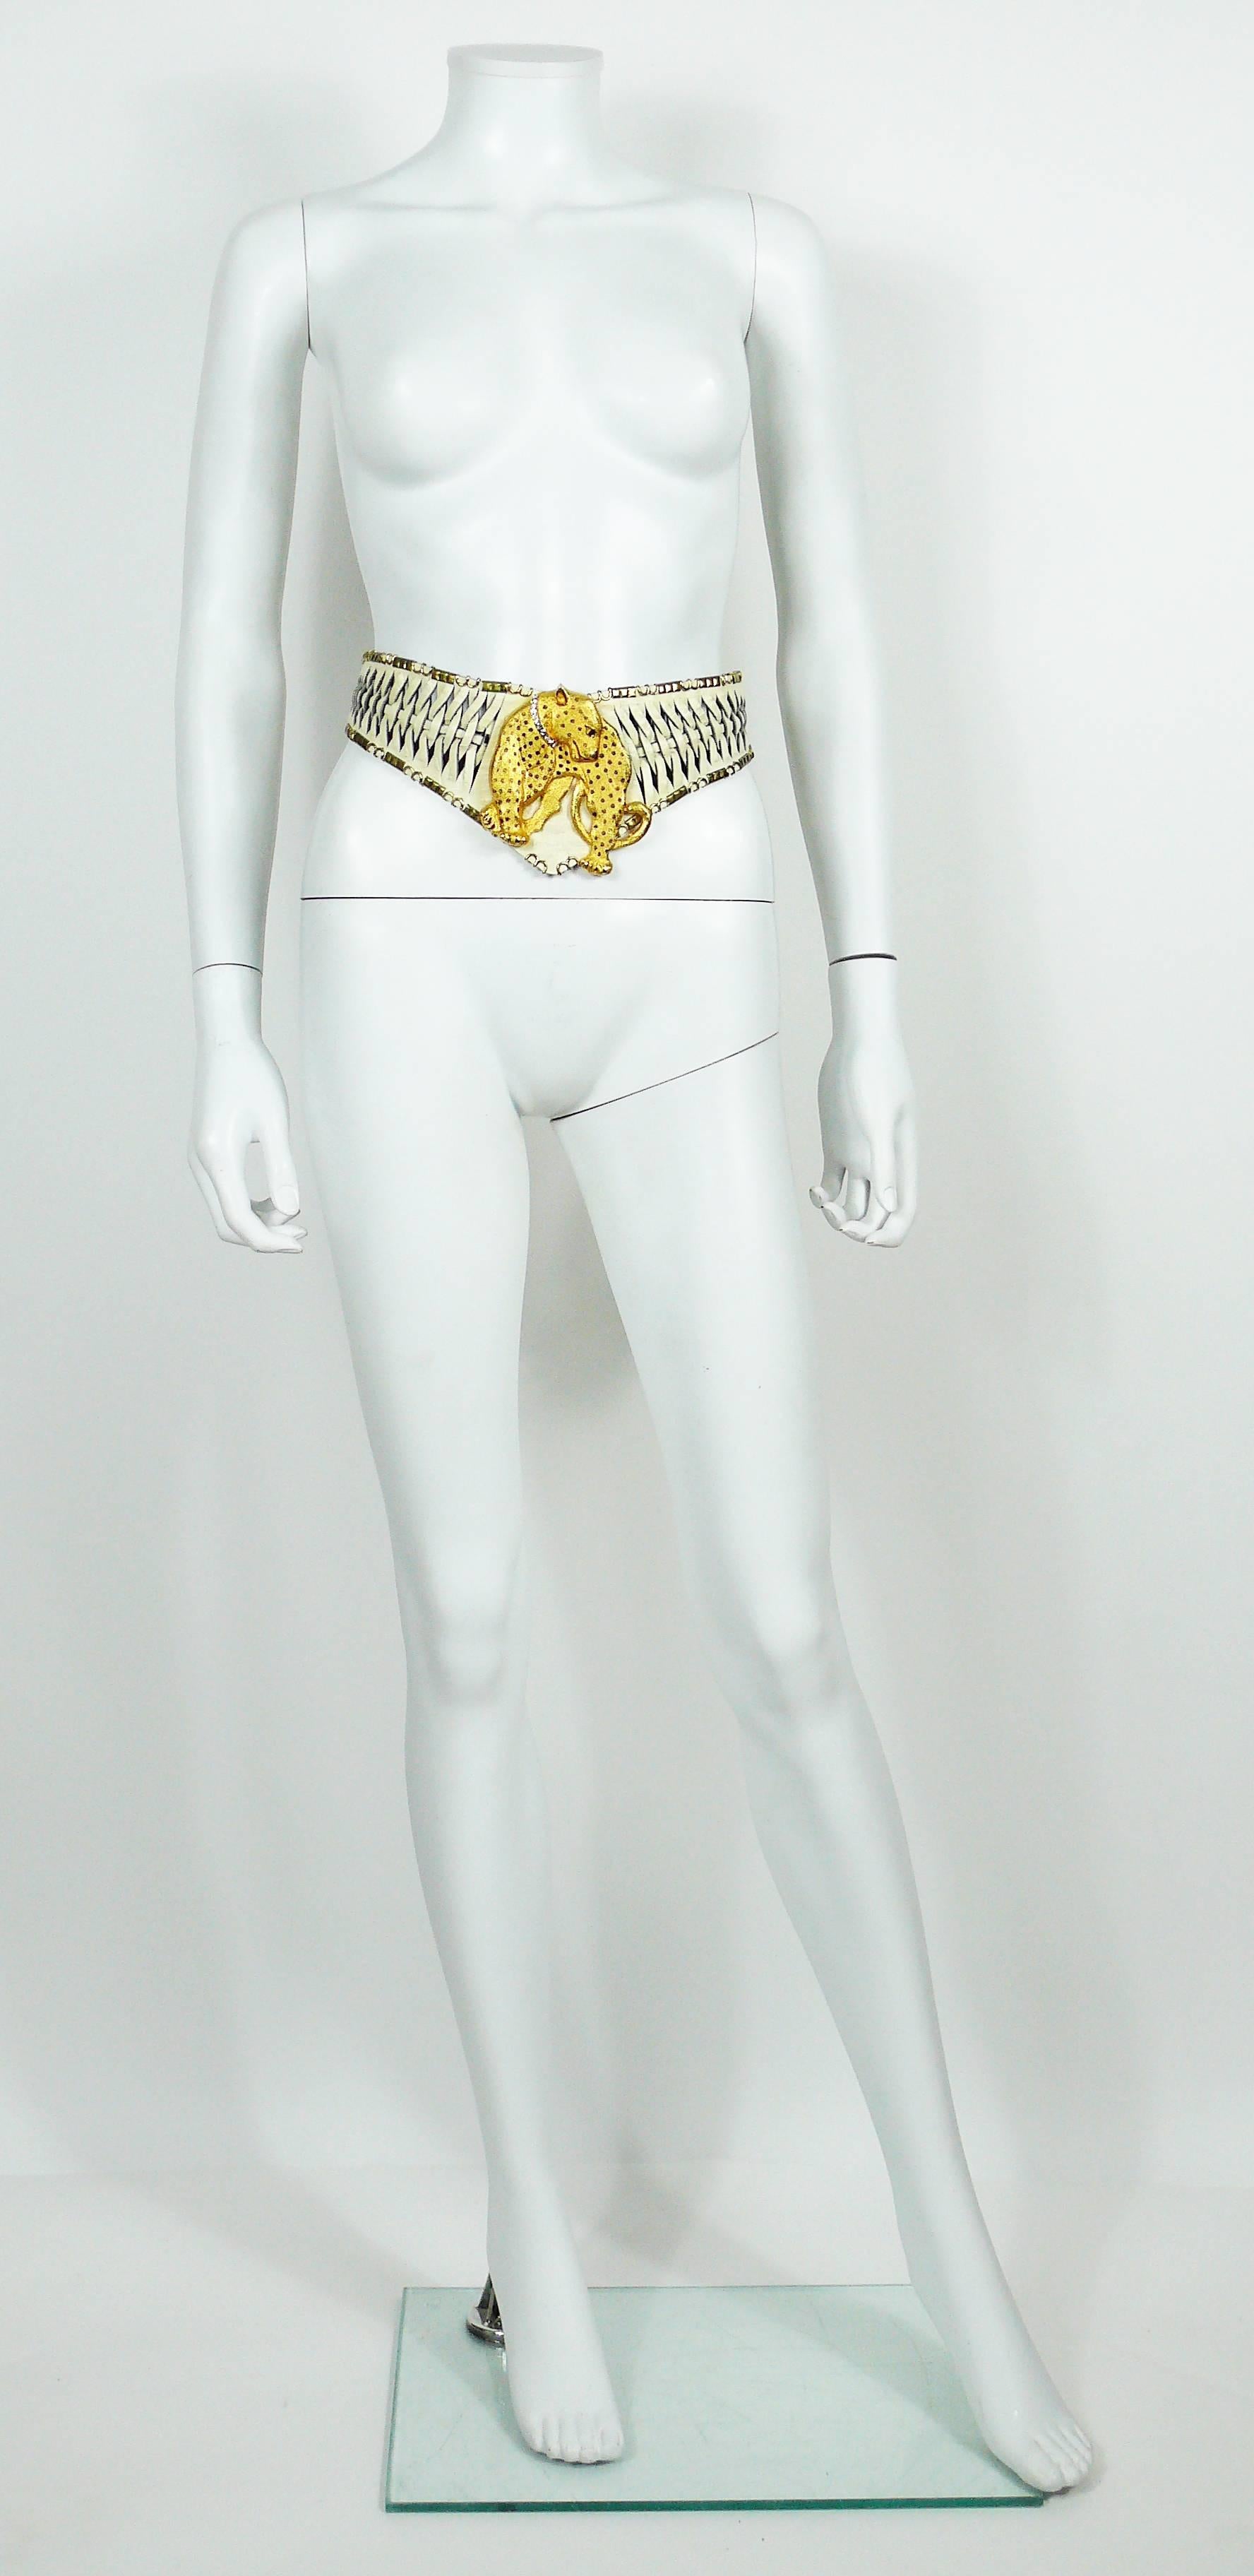 JOSE COTEL vintage rare belt made of woven white leather strips featuring a large gold toned leopard with a rhinestone collar.

Hook closure.
Adjustable size.

Embossed JOSE COTEL PARIS.
Made in France.

Indicative measurements : adjustable length